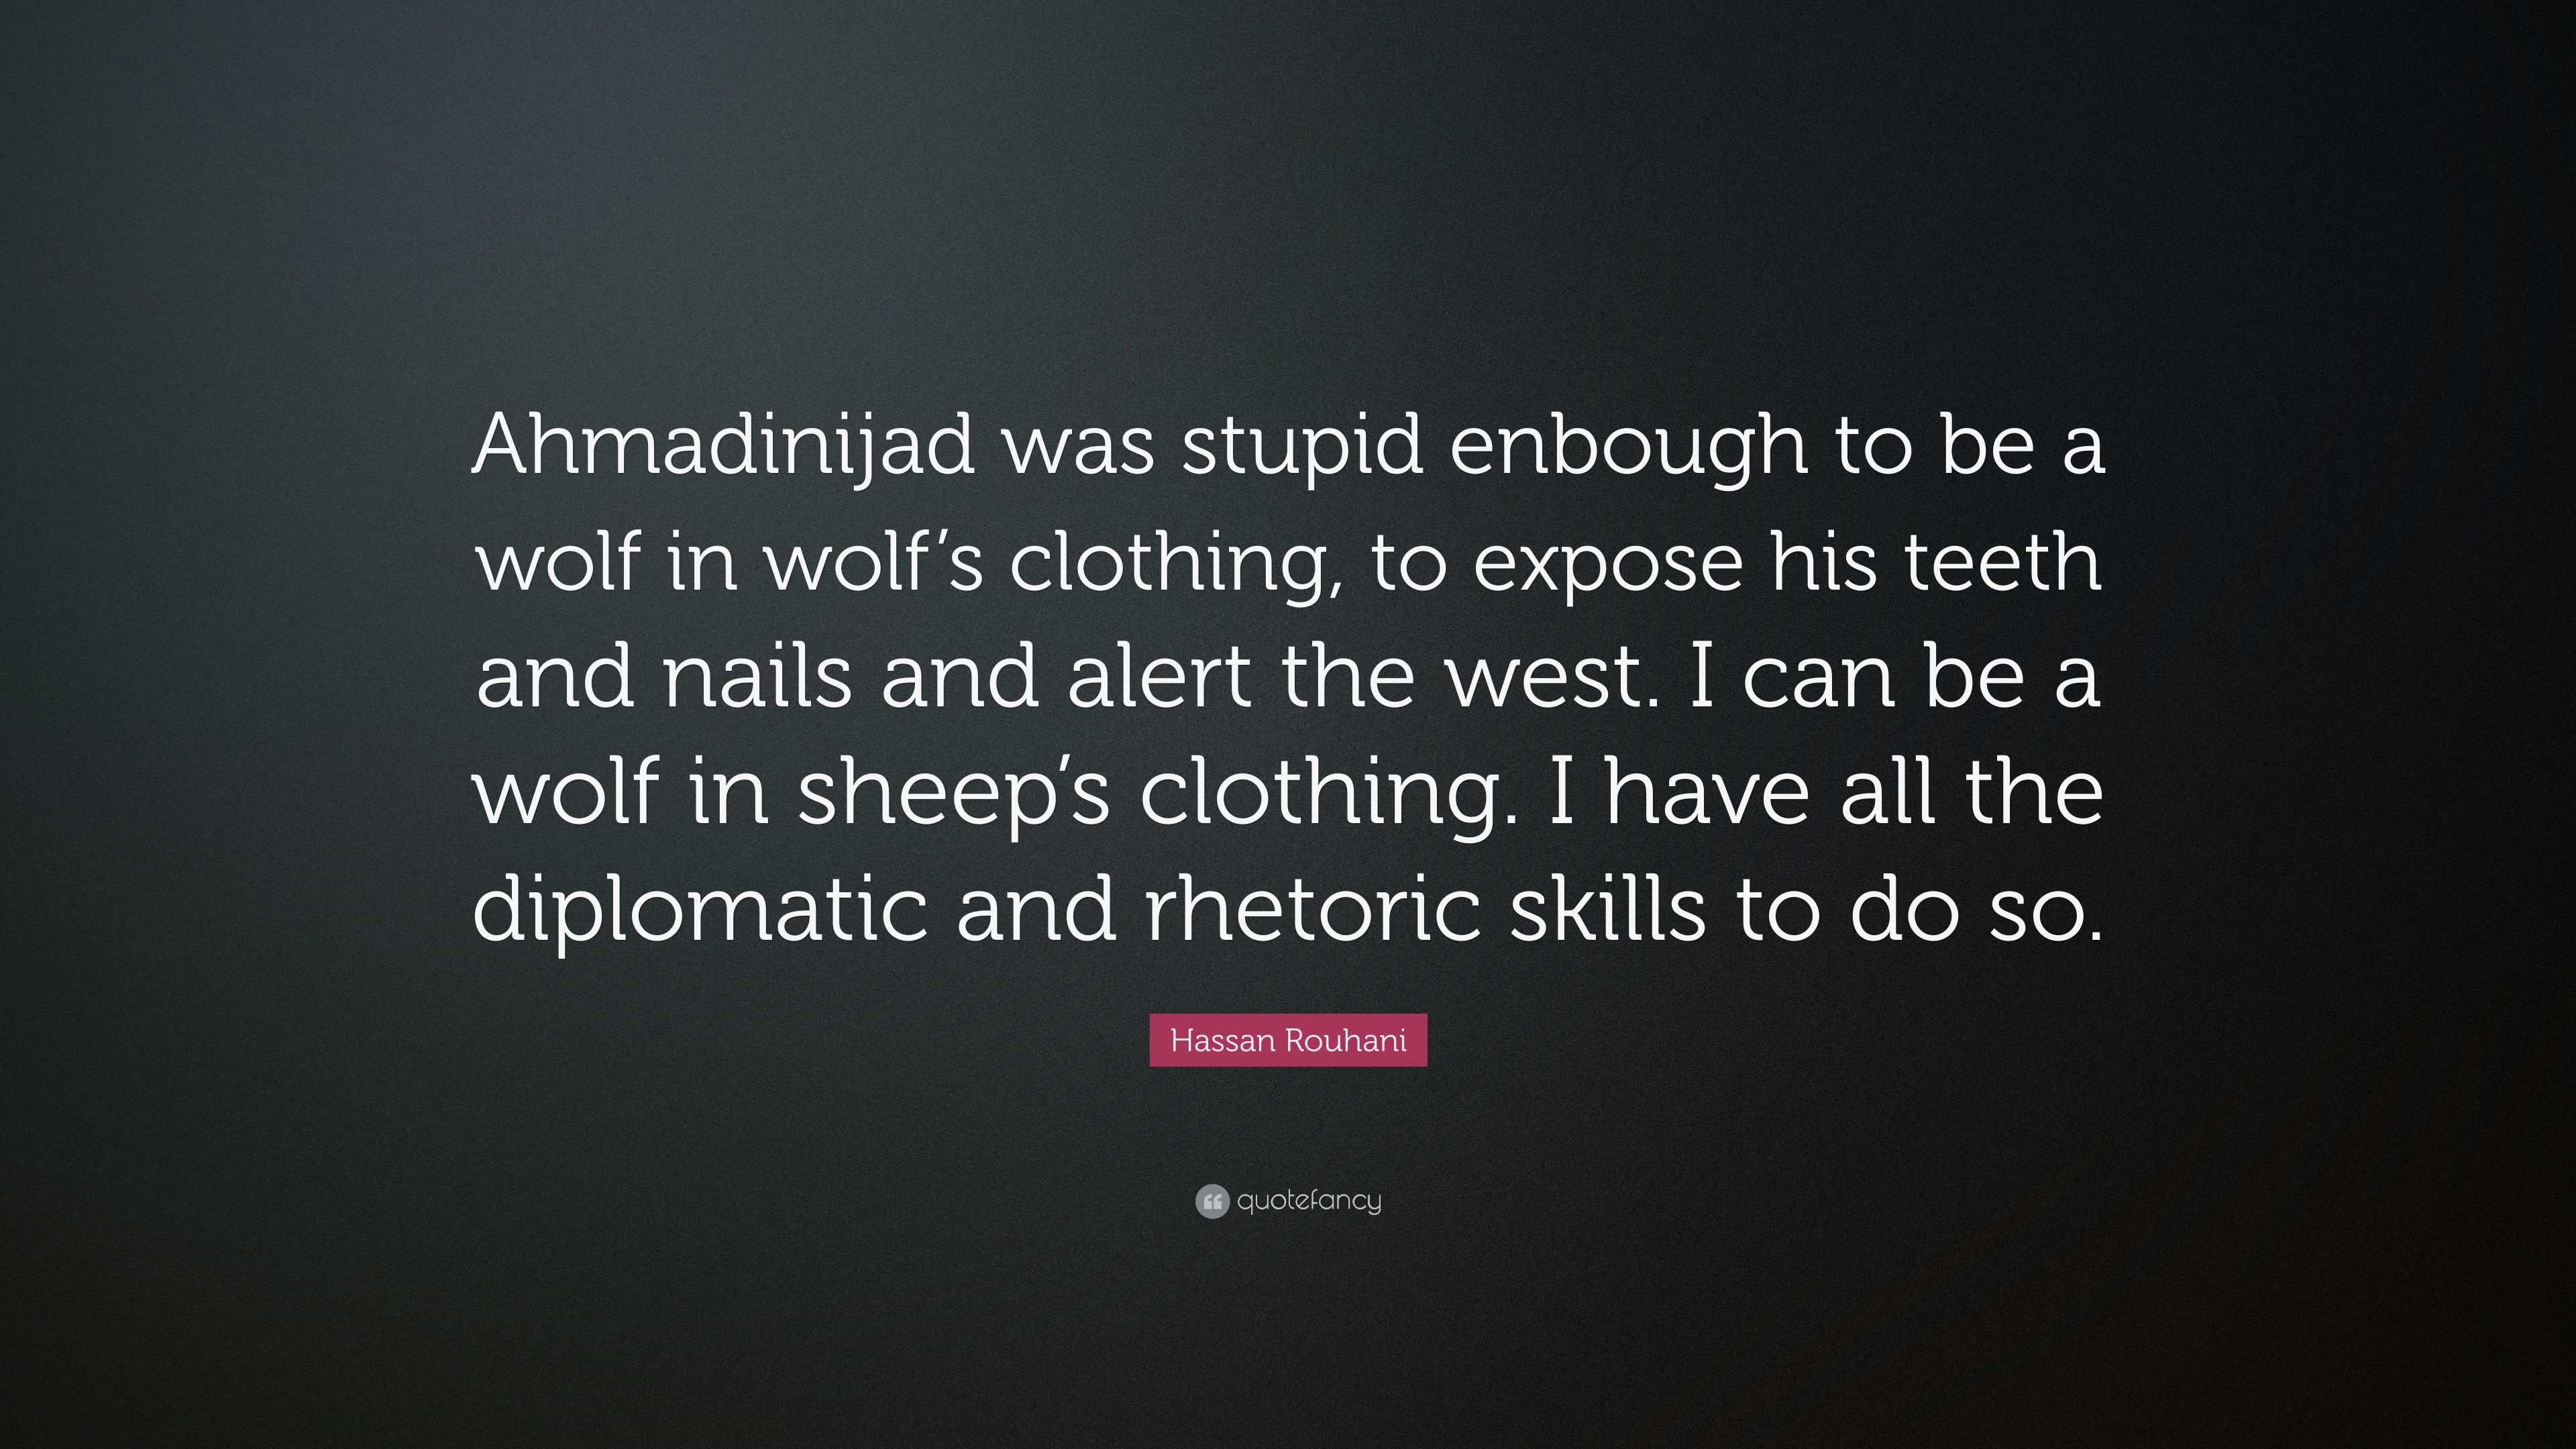 Hassan Rouhani Quote: “Ahmadinijad was stupid enbough to be a wolf